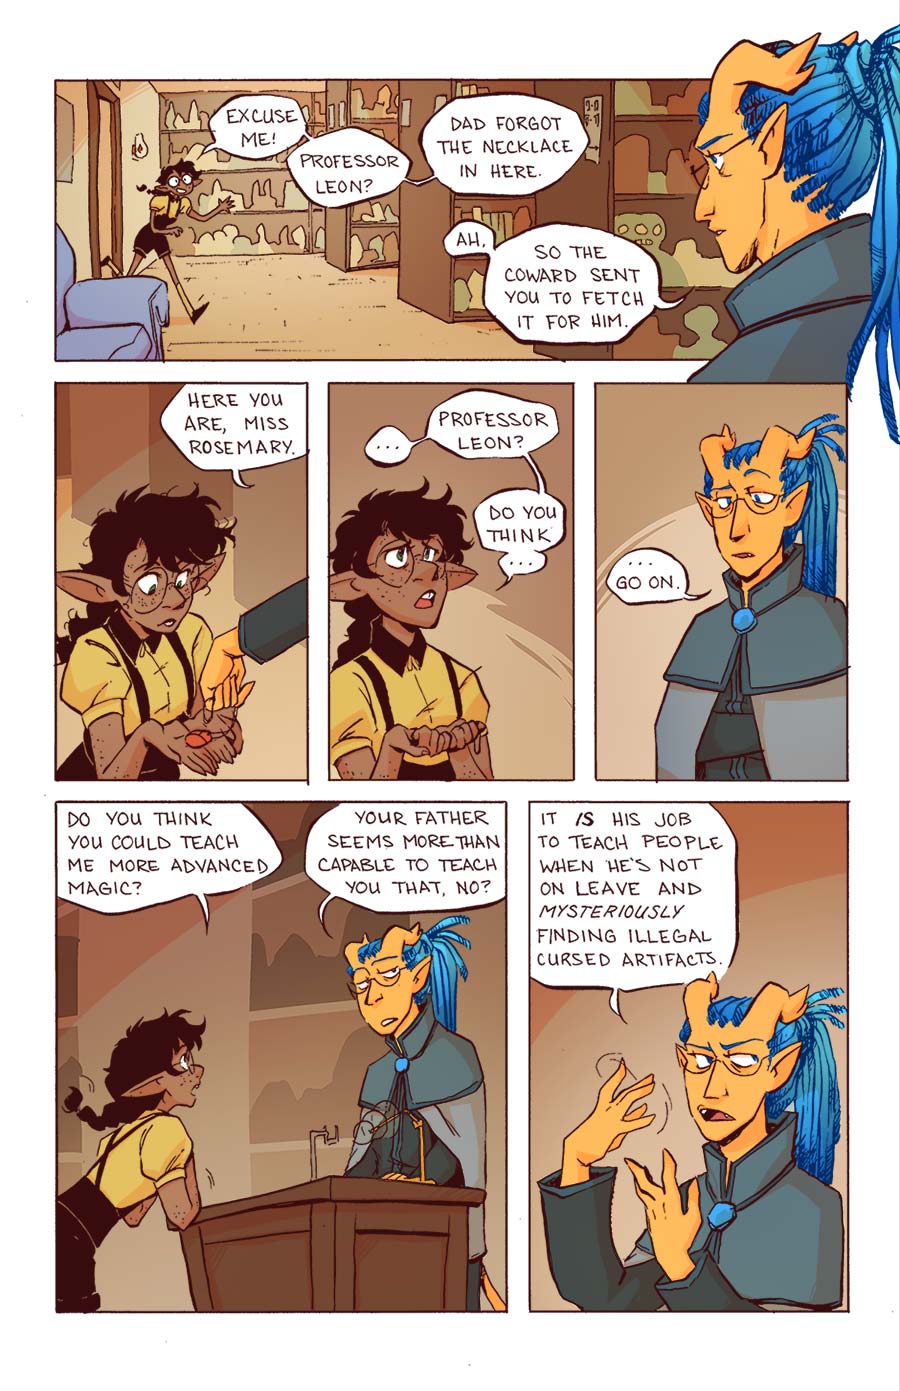 Serule is just constantly throwing shade at Toivo